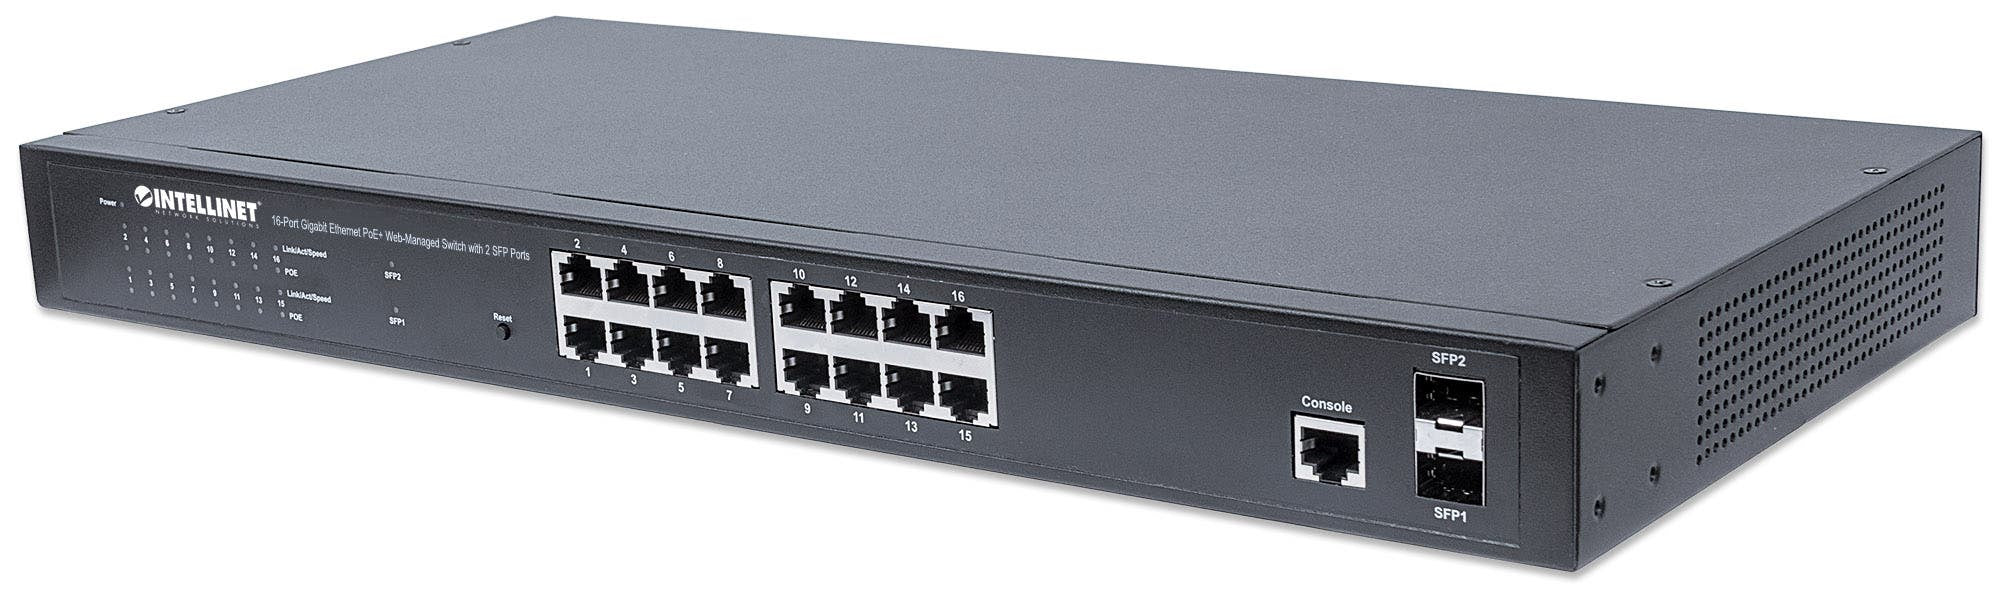 Intellinet 16-Port Gigabit Ethernet PoE+ Web-Managed Switch with 2 SFP Ports, 16 x PoE ports, IEEE 802.3at/af Power over Ethernet (PoE+/PoE), 2 x SFP, Endspan, 19 Rackmount" (UK Power Cord)